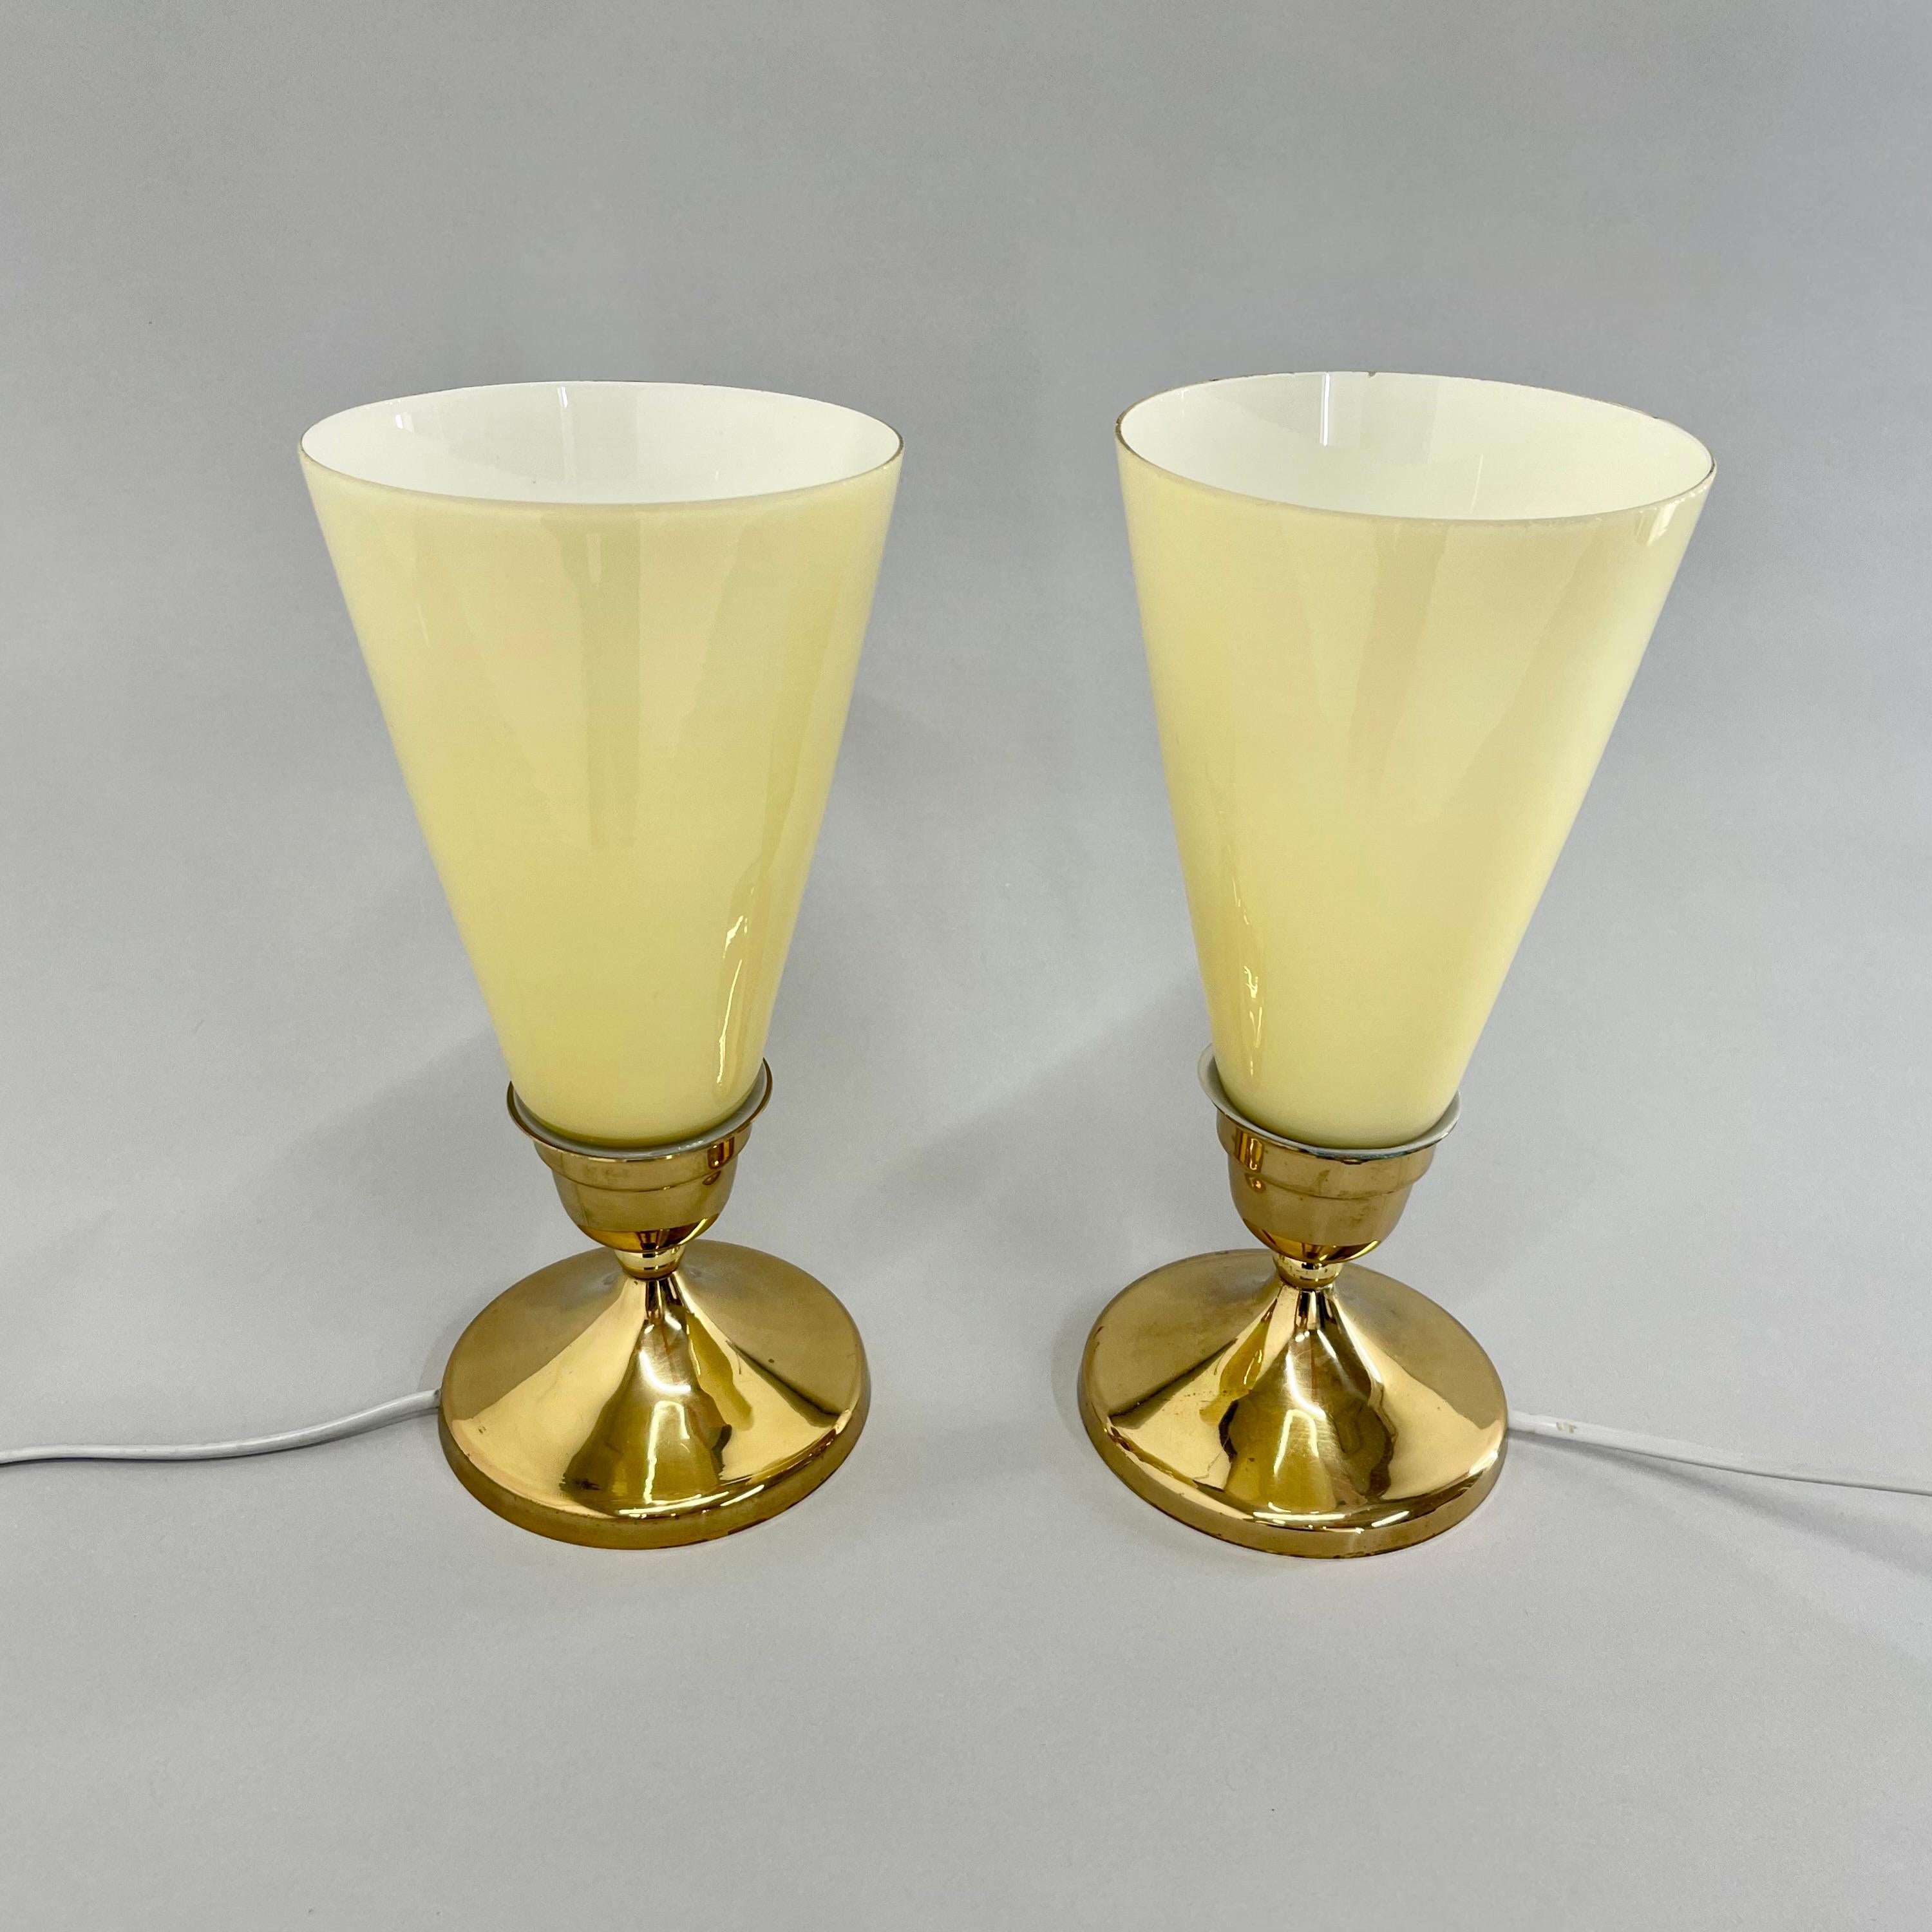 Pair of mid-century table or bedside lamps, produced by Kamenicky Senov Glassworks in former Czechoslovakia in the 1960's.